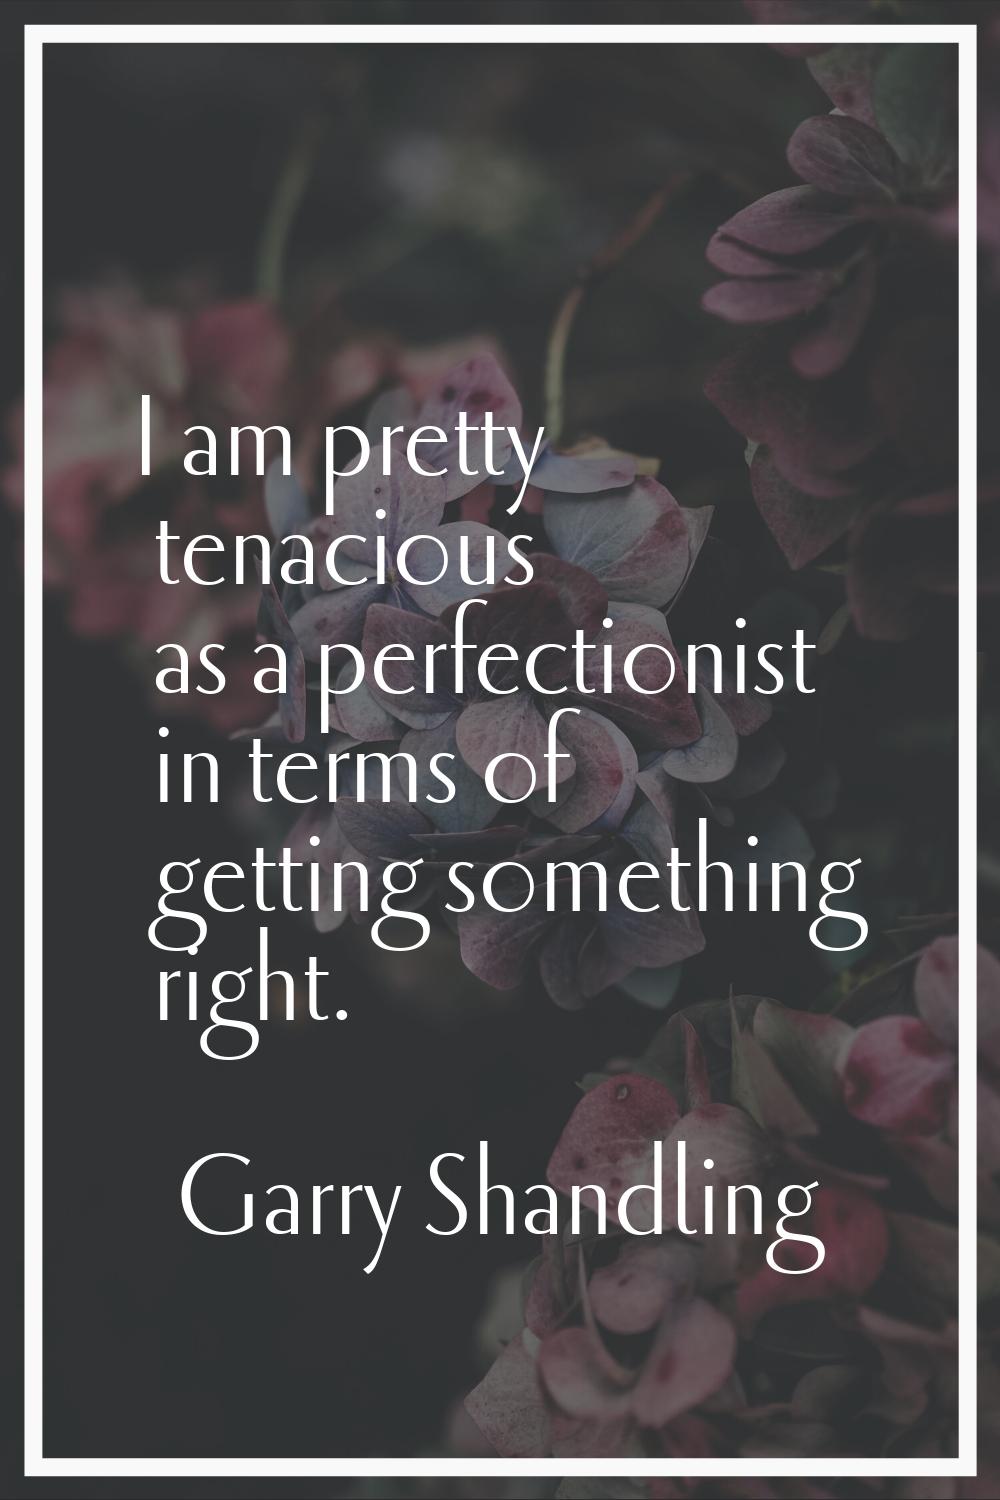 I am pretty tenacious as a perfectionist in terms of getting something right.